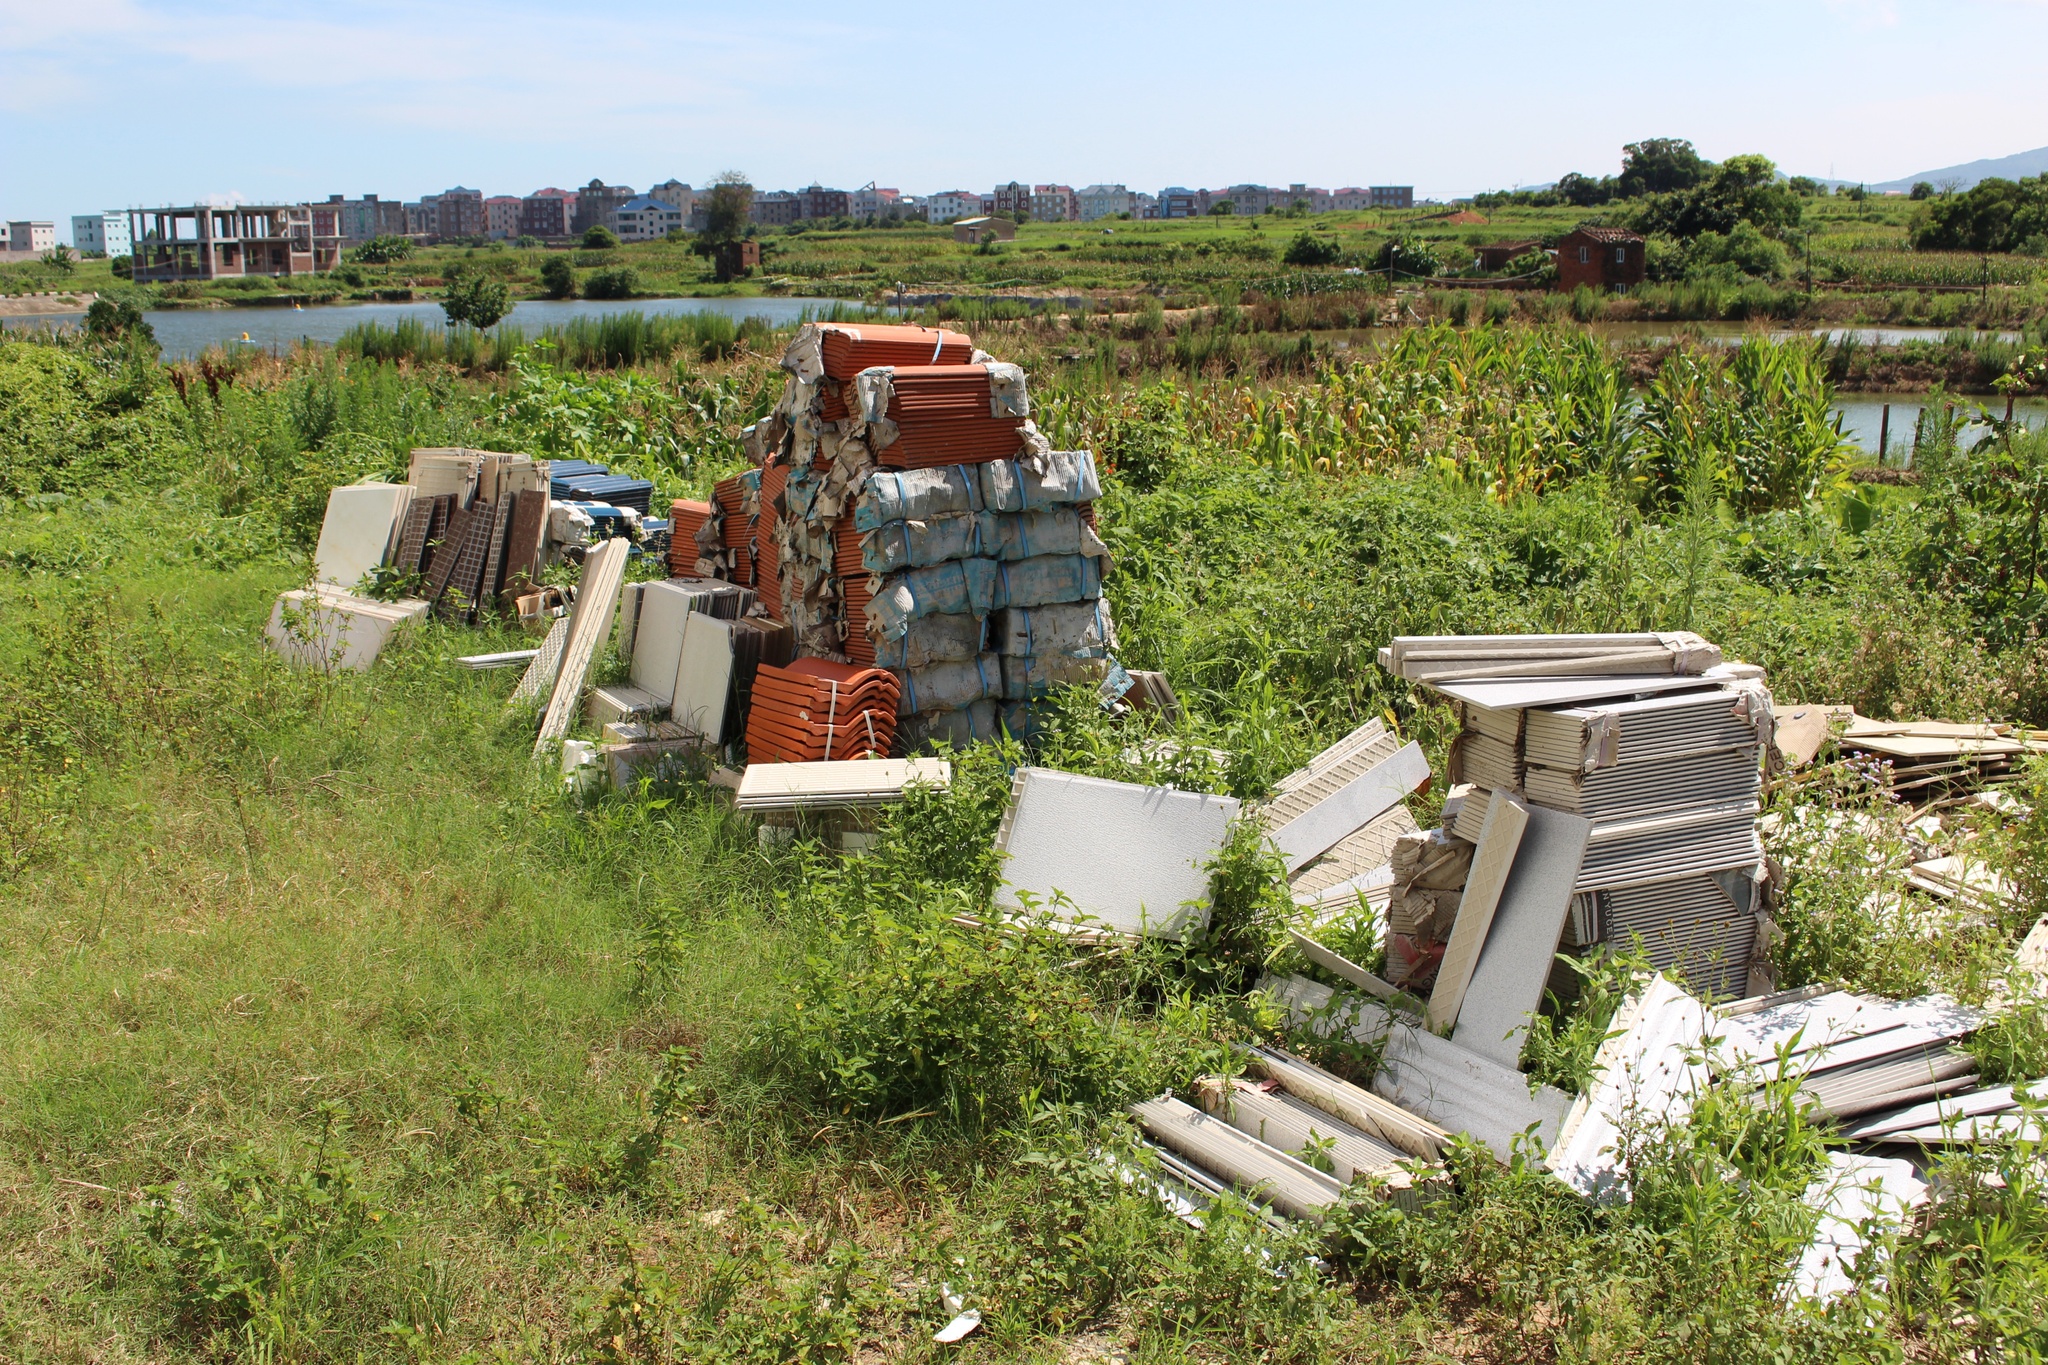 Concrete and terracotta slabs sit in discarded piles in a deserted field or empty lot with a pond and housing development in the distance behind them